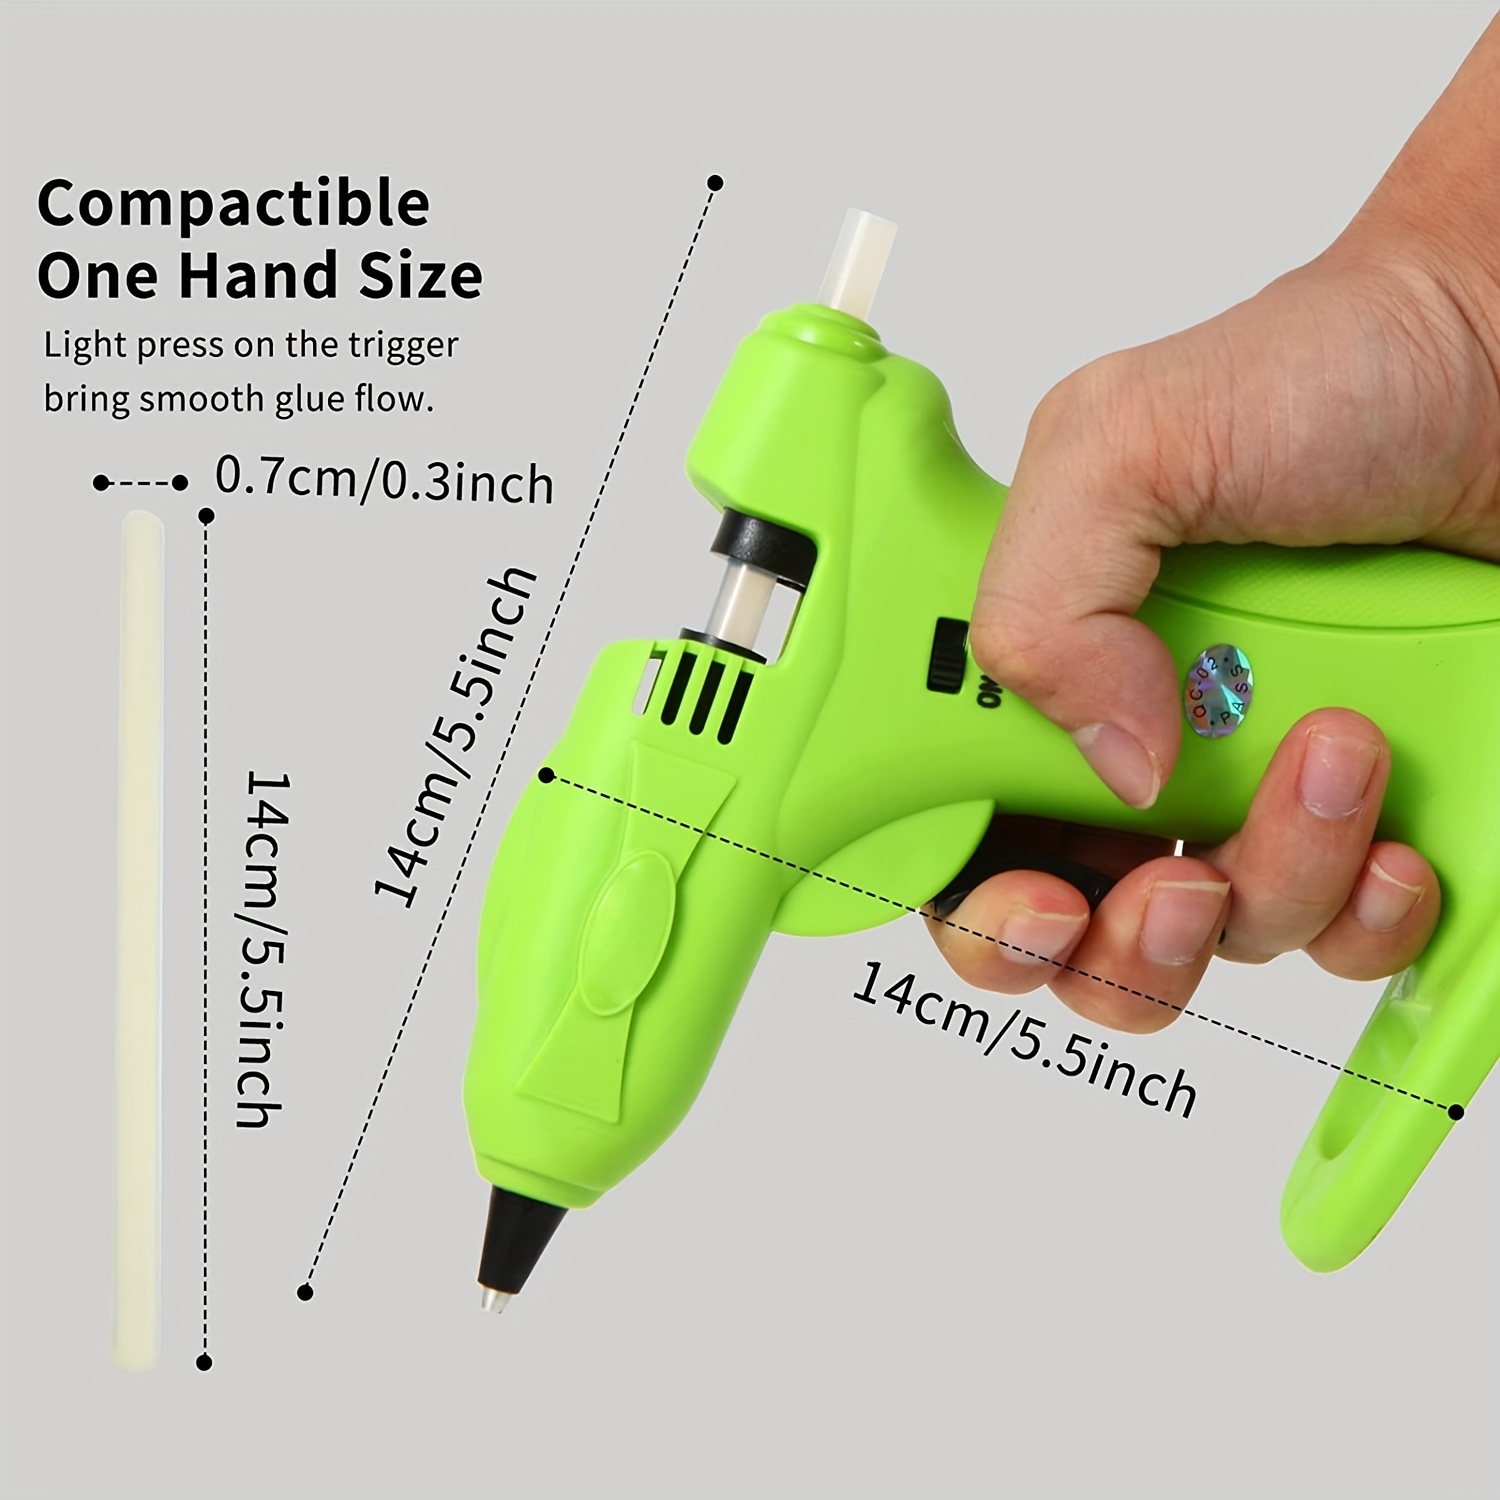 Cordless Hot Glue-, Wireless USB Rechargeable Hot Melt Glue- with 10 Pcs  Glue Sticks for Arts, Home Repairs 